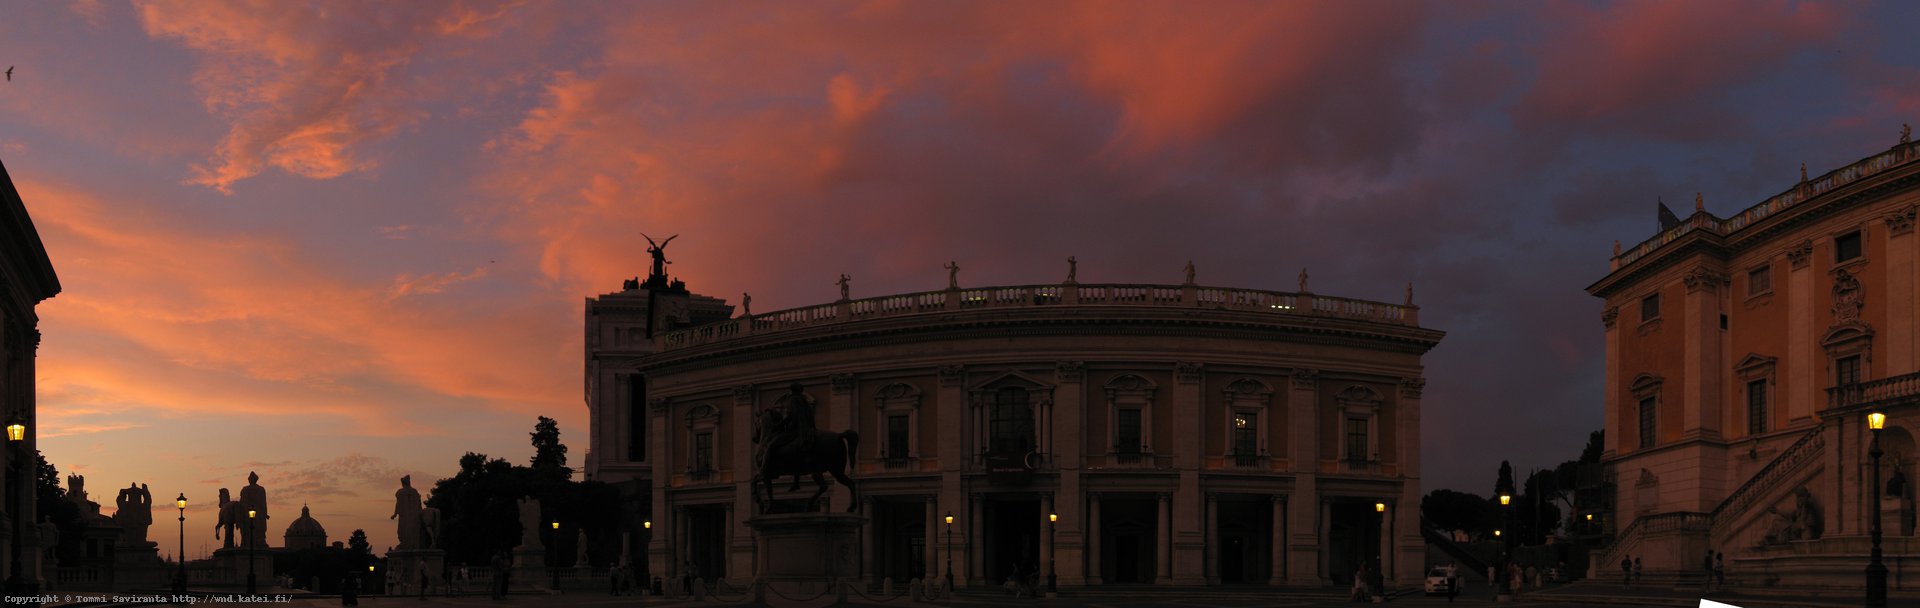 Day #4: Capitoline museums at sunset